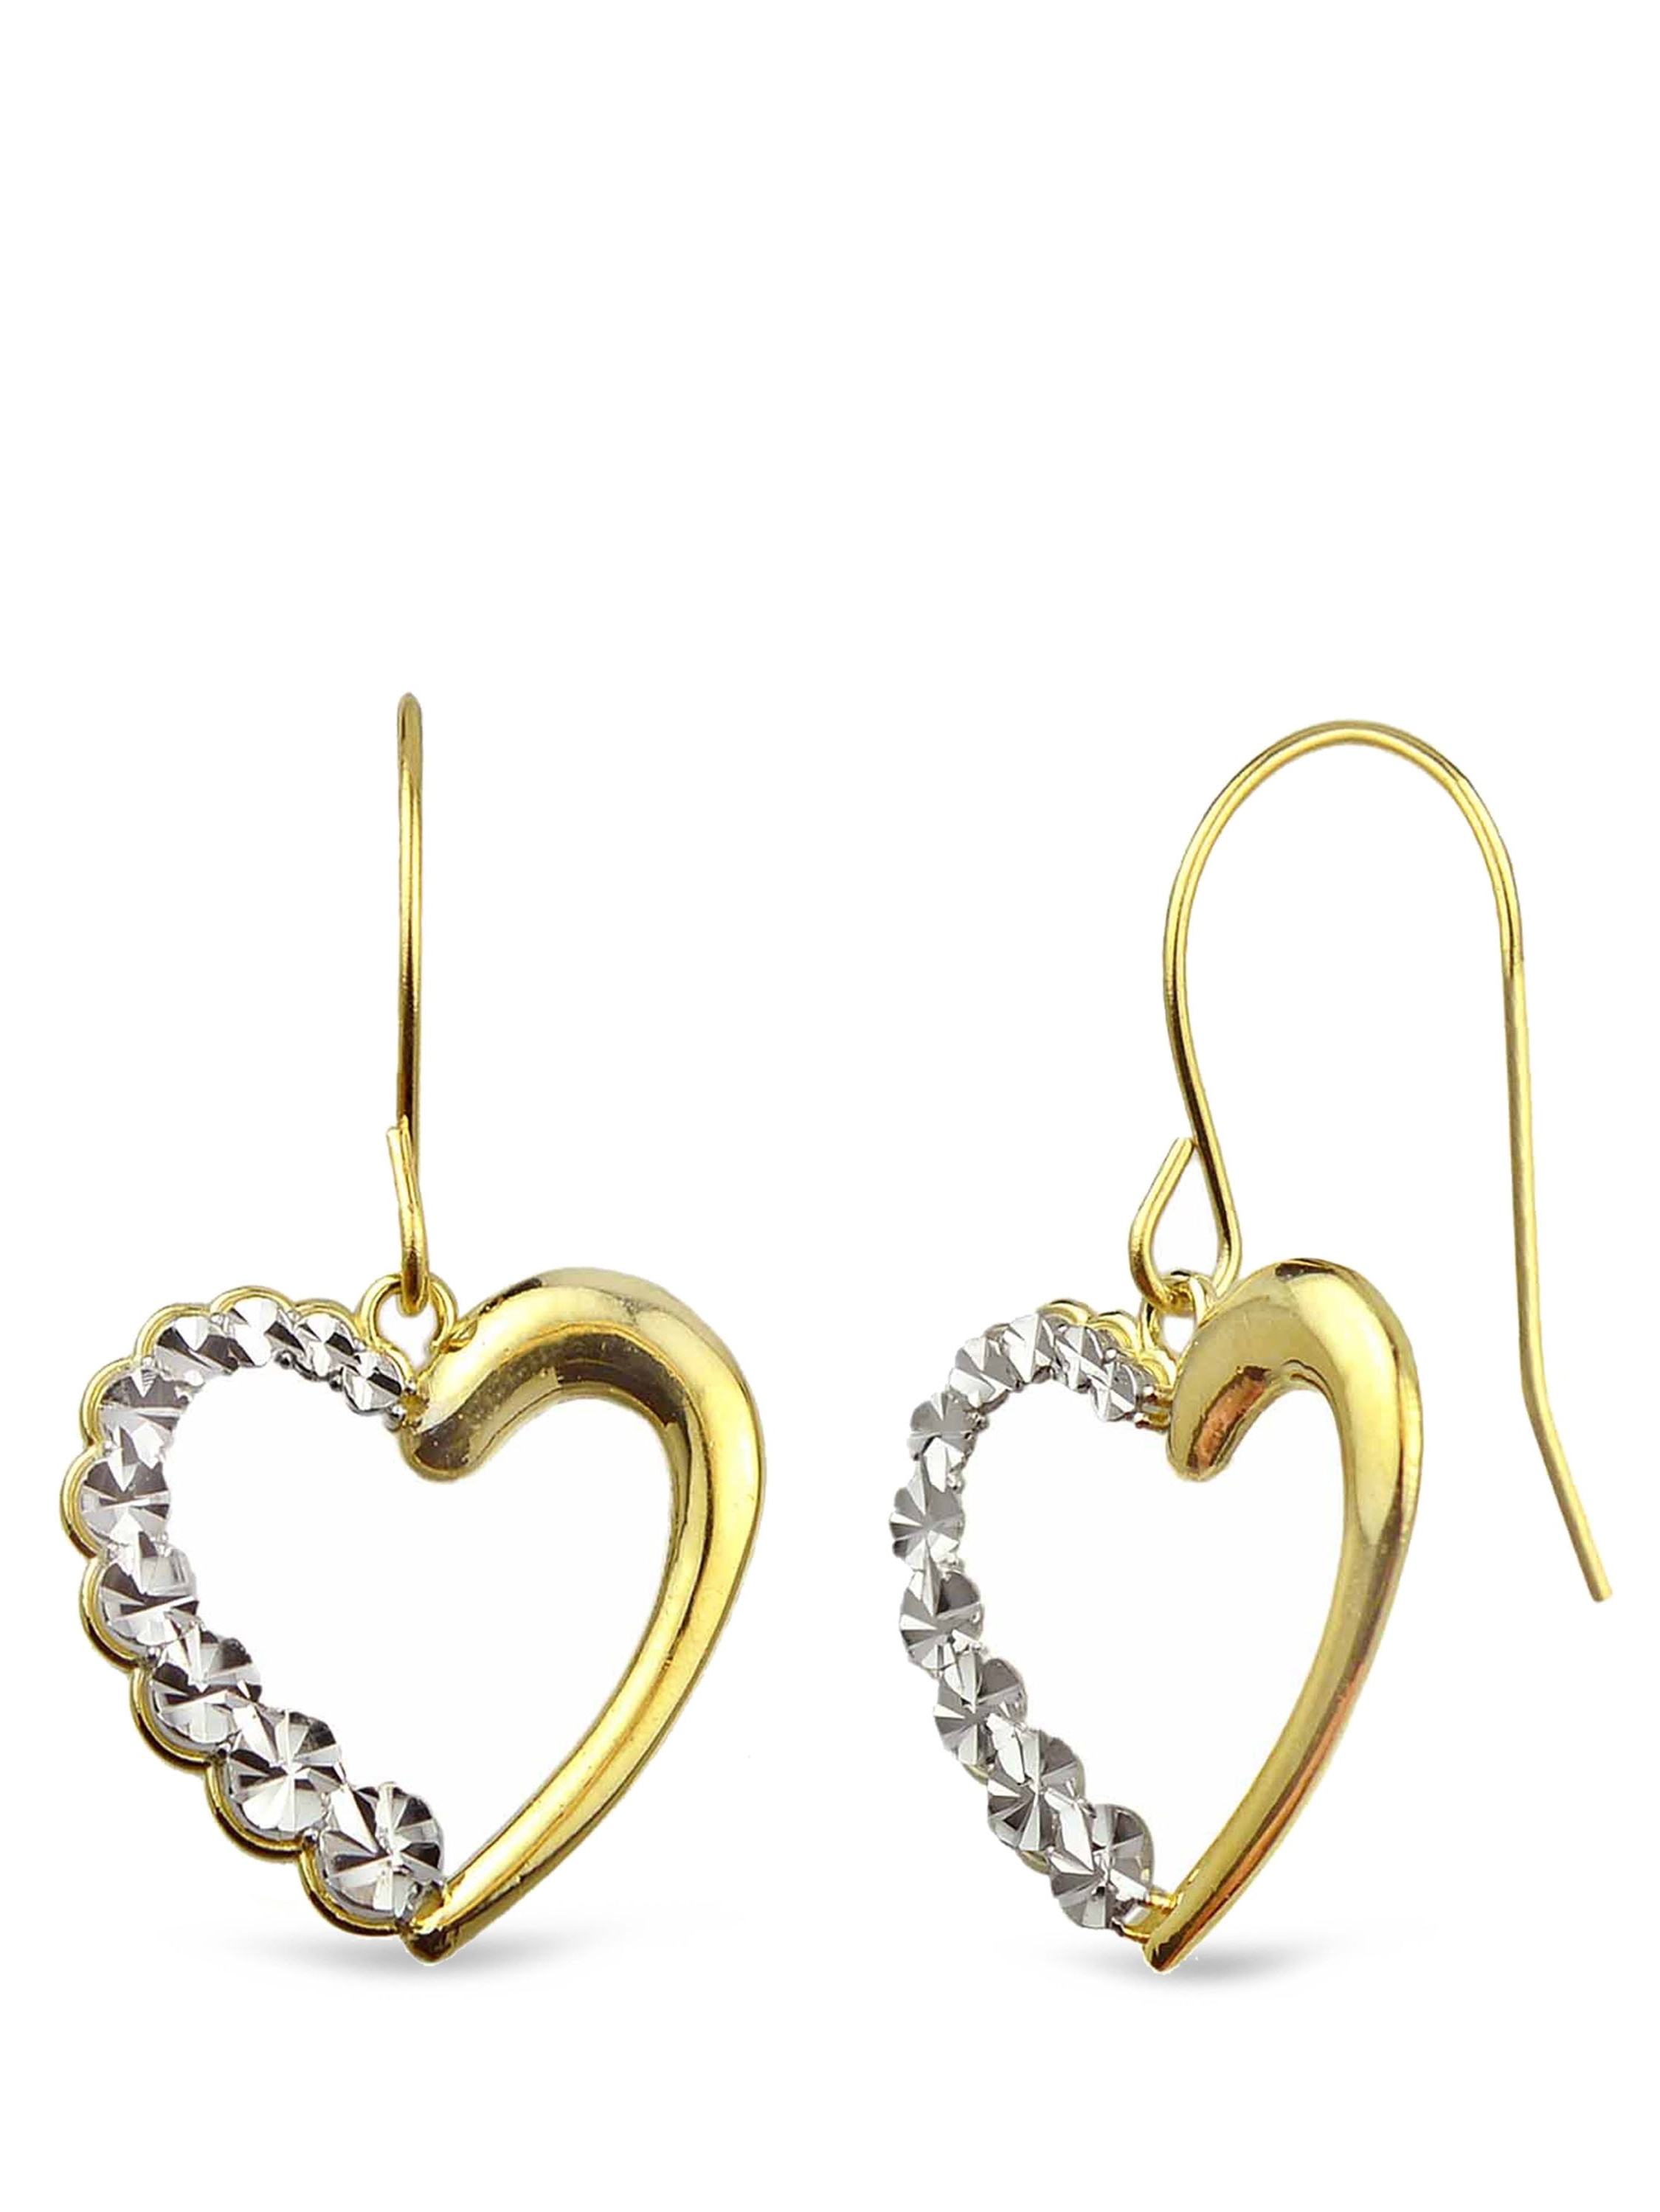 Handcrafted 10kt Yellow Gold Diamond-Cut Heart Dangle Earrings - image 2 of 3